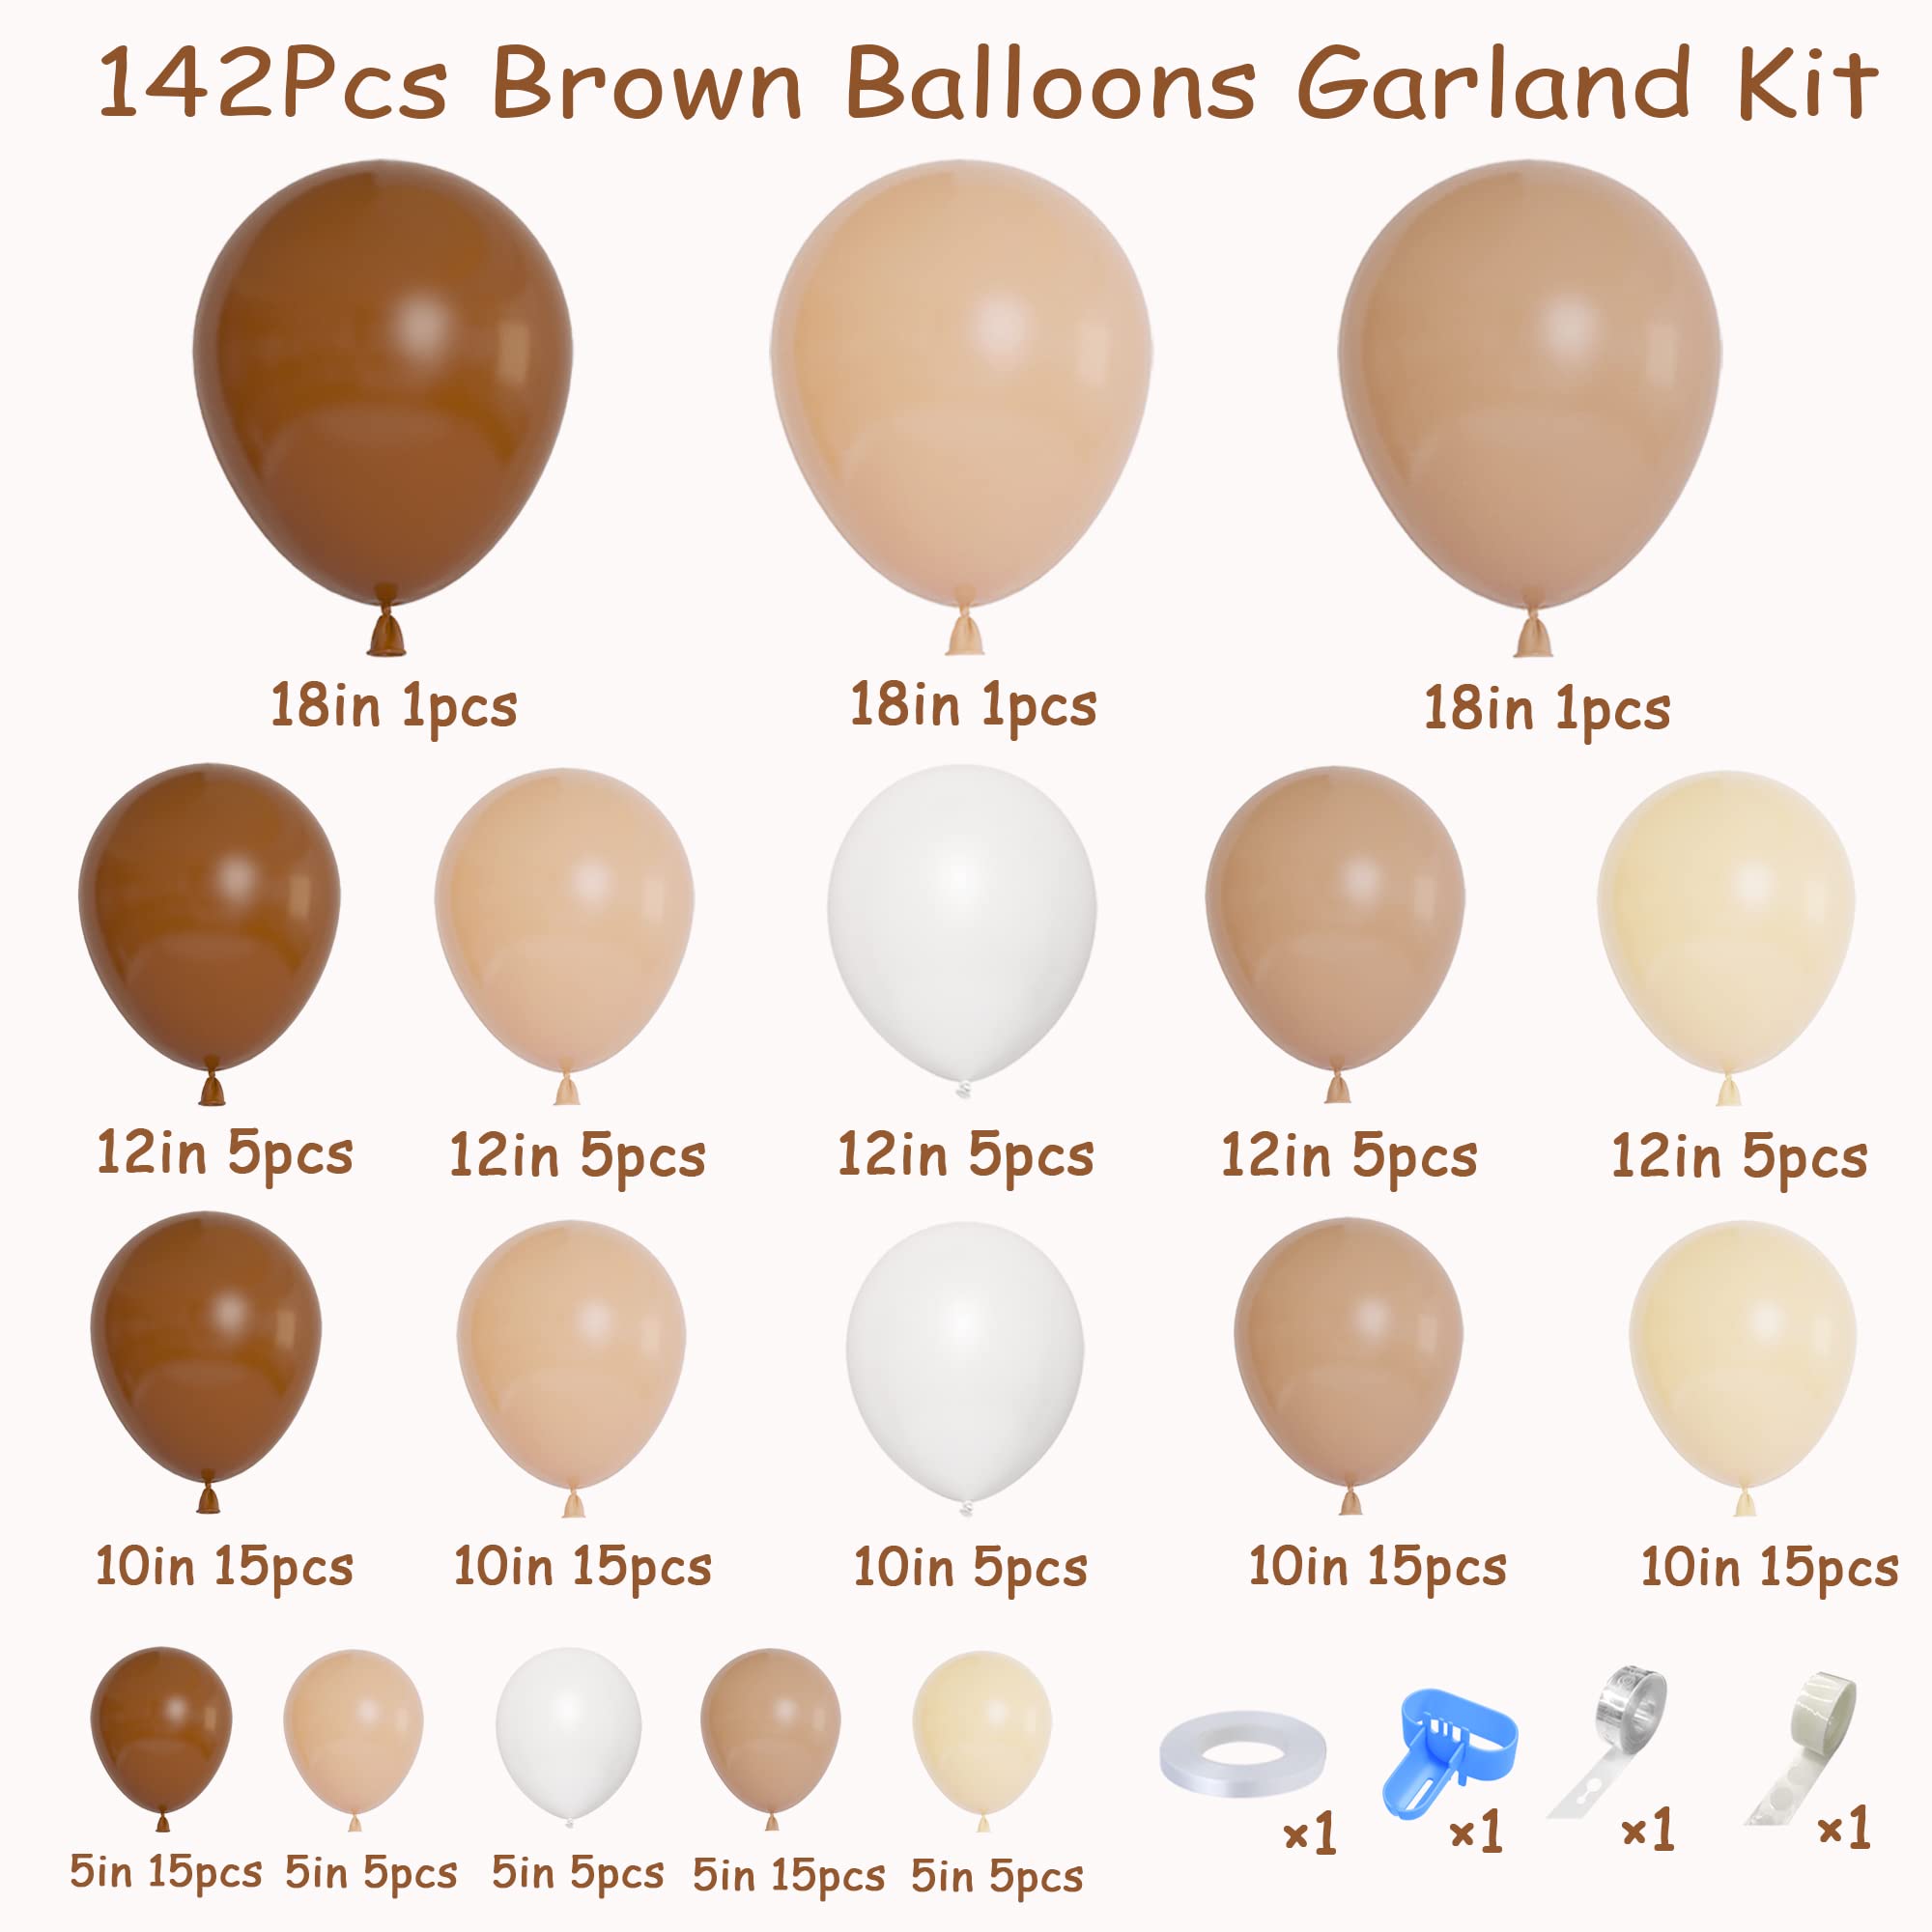 142Pcs Brown Balloons Garland Arch Kit Nude Coffee Brown Boho Blush Tan Neutral Balloons for Teddy Bear Baby Shower Neutral Woodland Wedding Jungle Safari Wild One Birthday Party Decorations